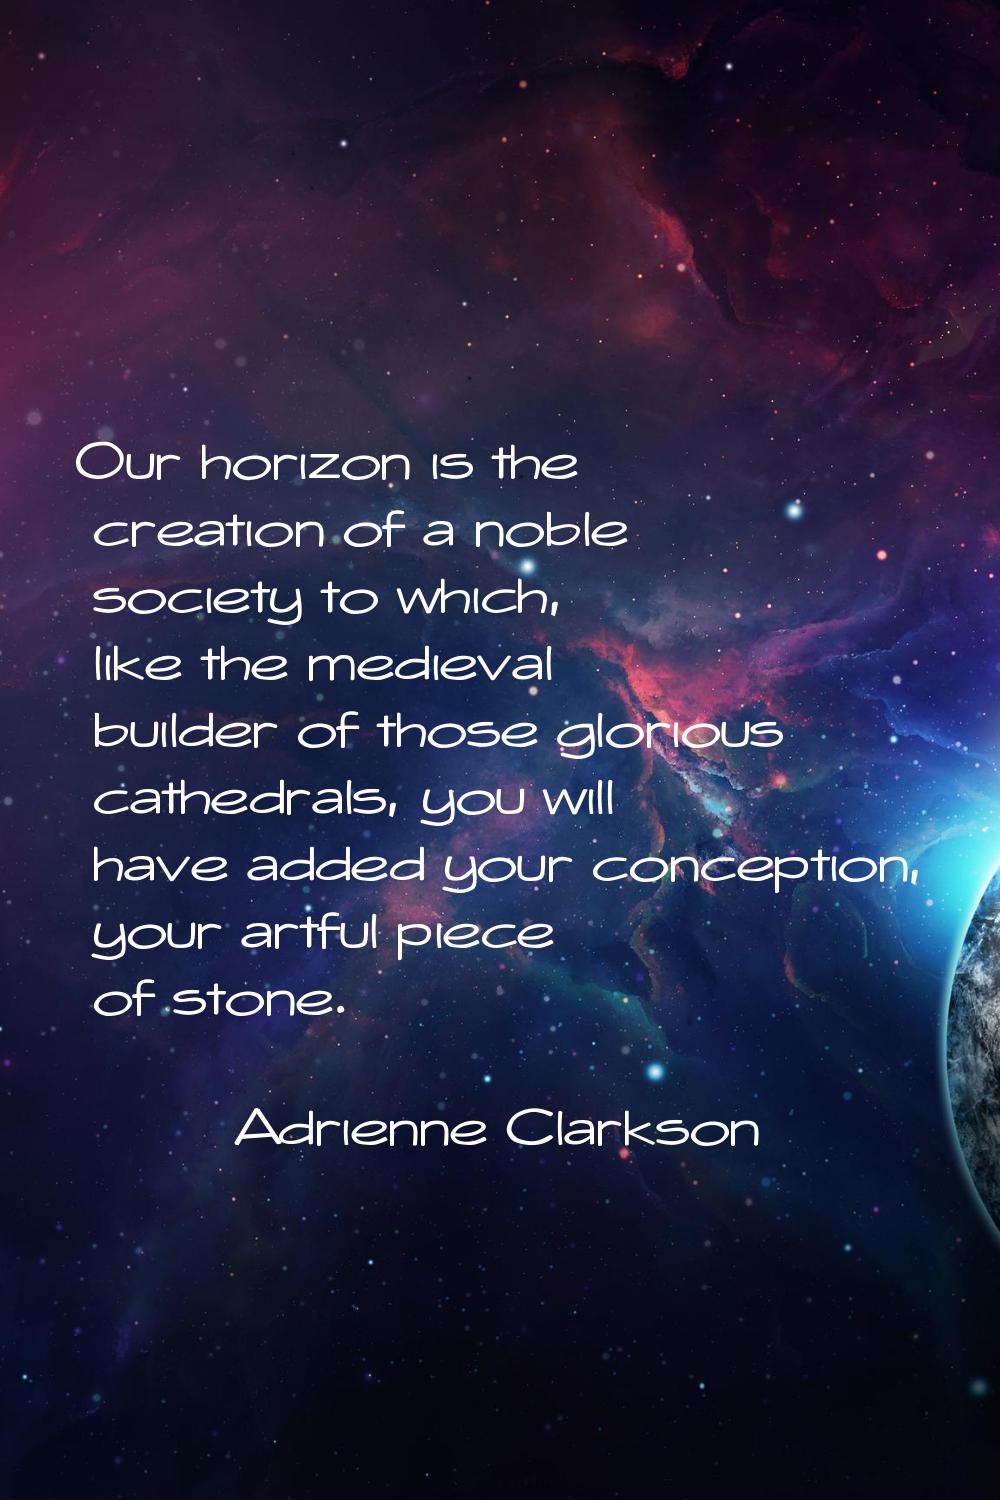 Our horizon is the creation of a noble society to which, like the medieval builder of those gloriou